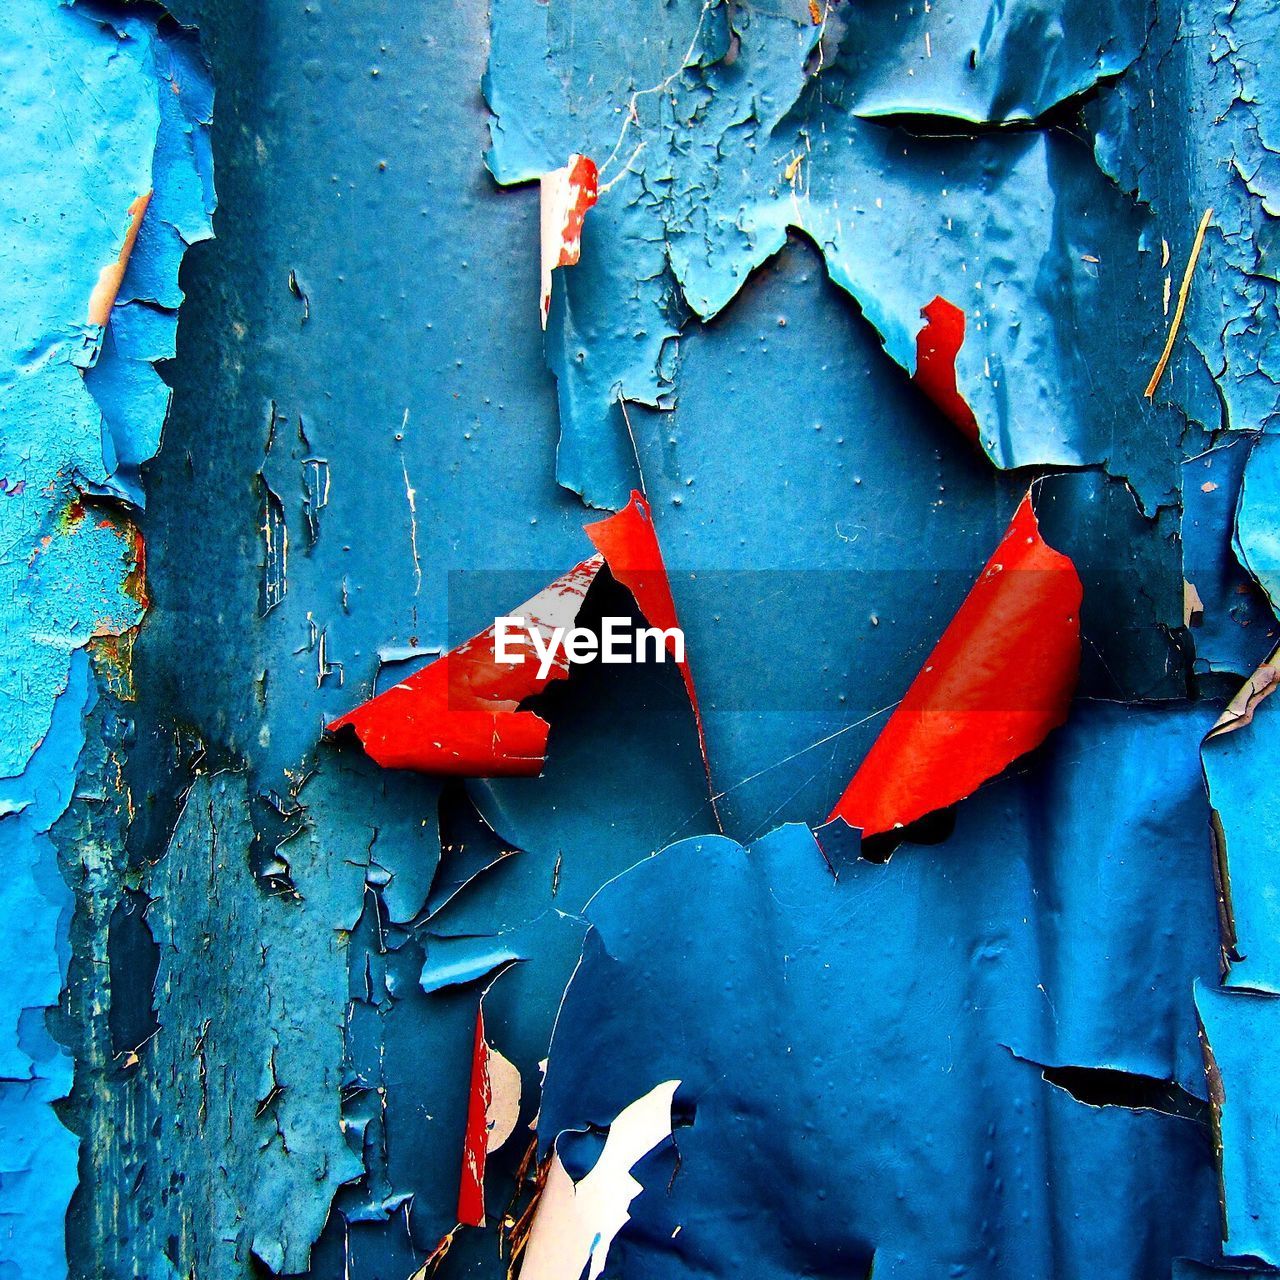 Close-up shot of patches of peeling blue paint with red undersides